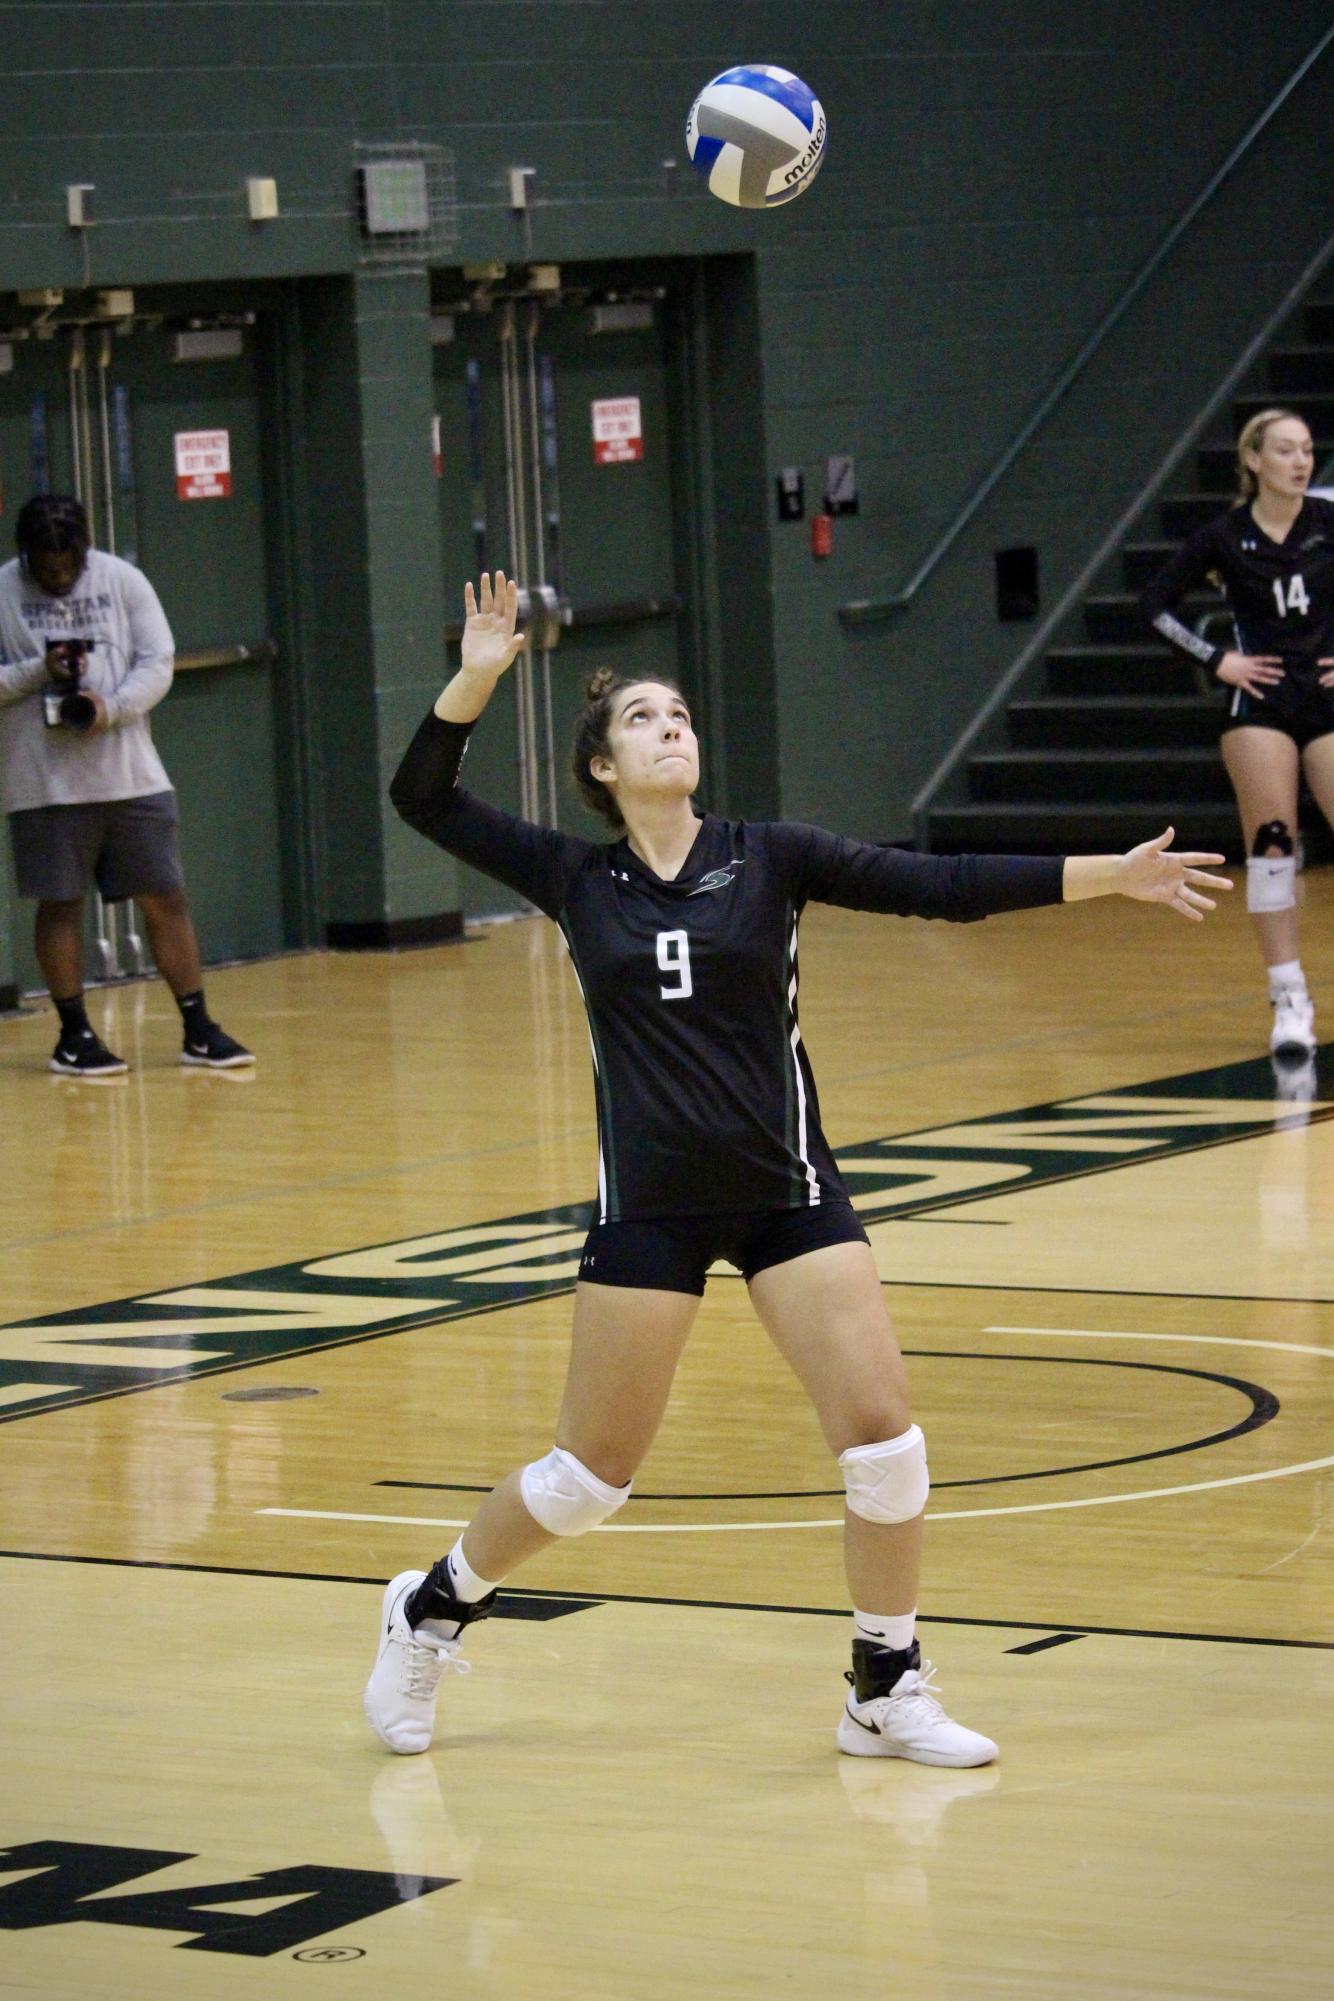 Junior setter Makala Thompson serving in a match earlier this month against Albright.